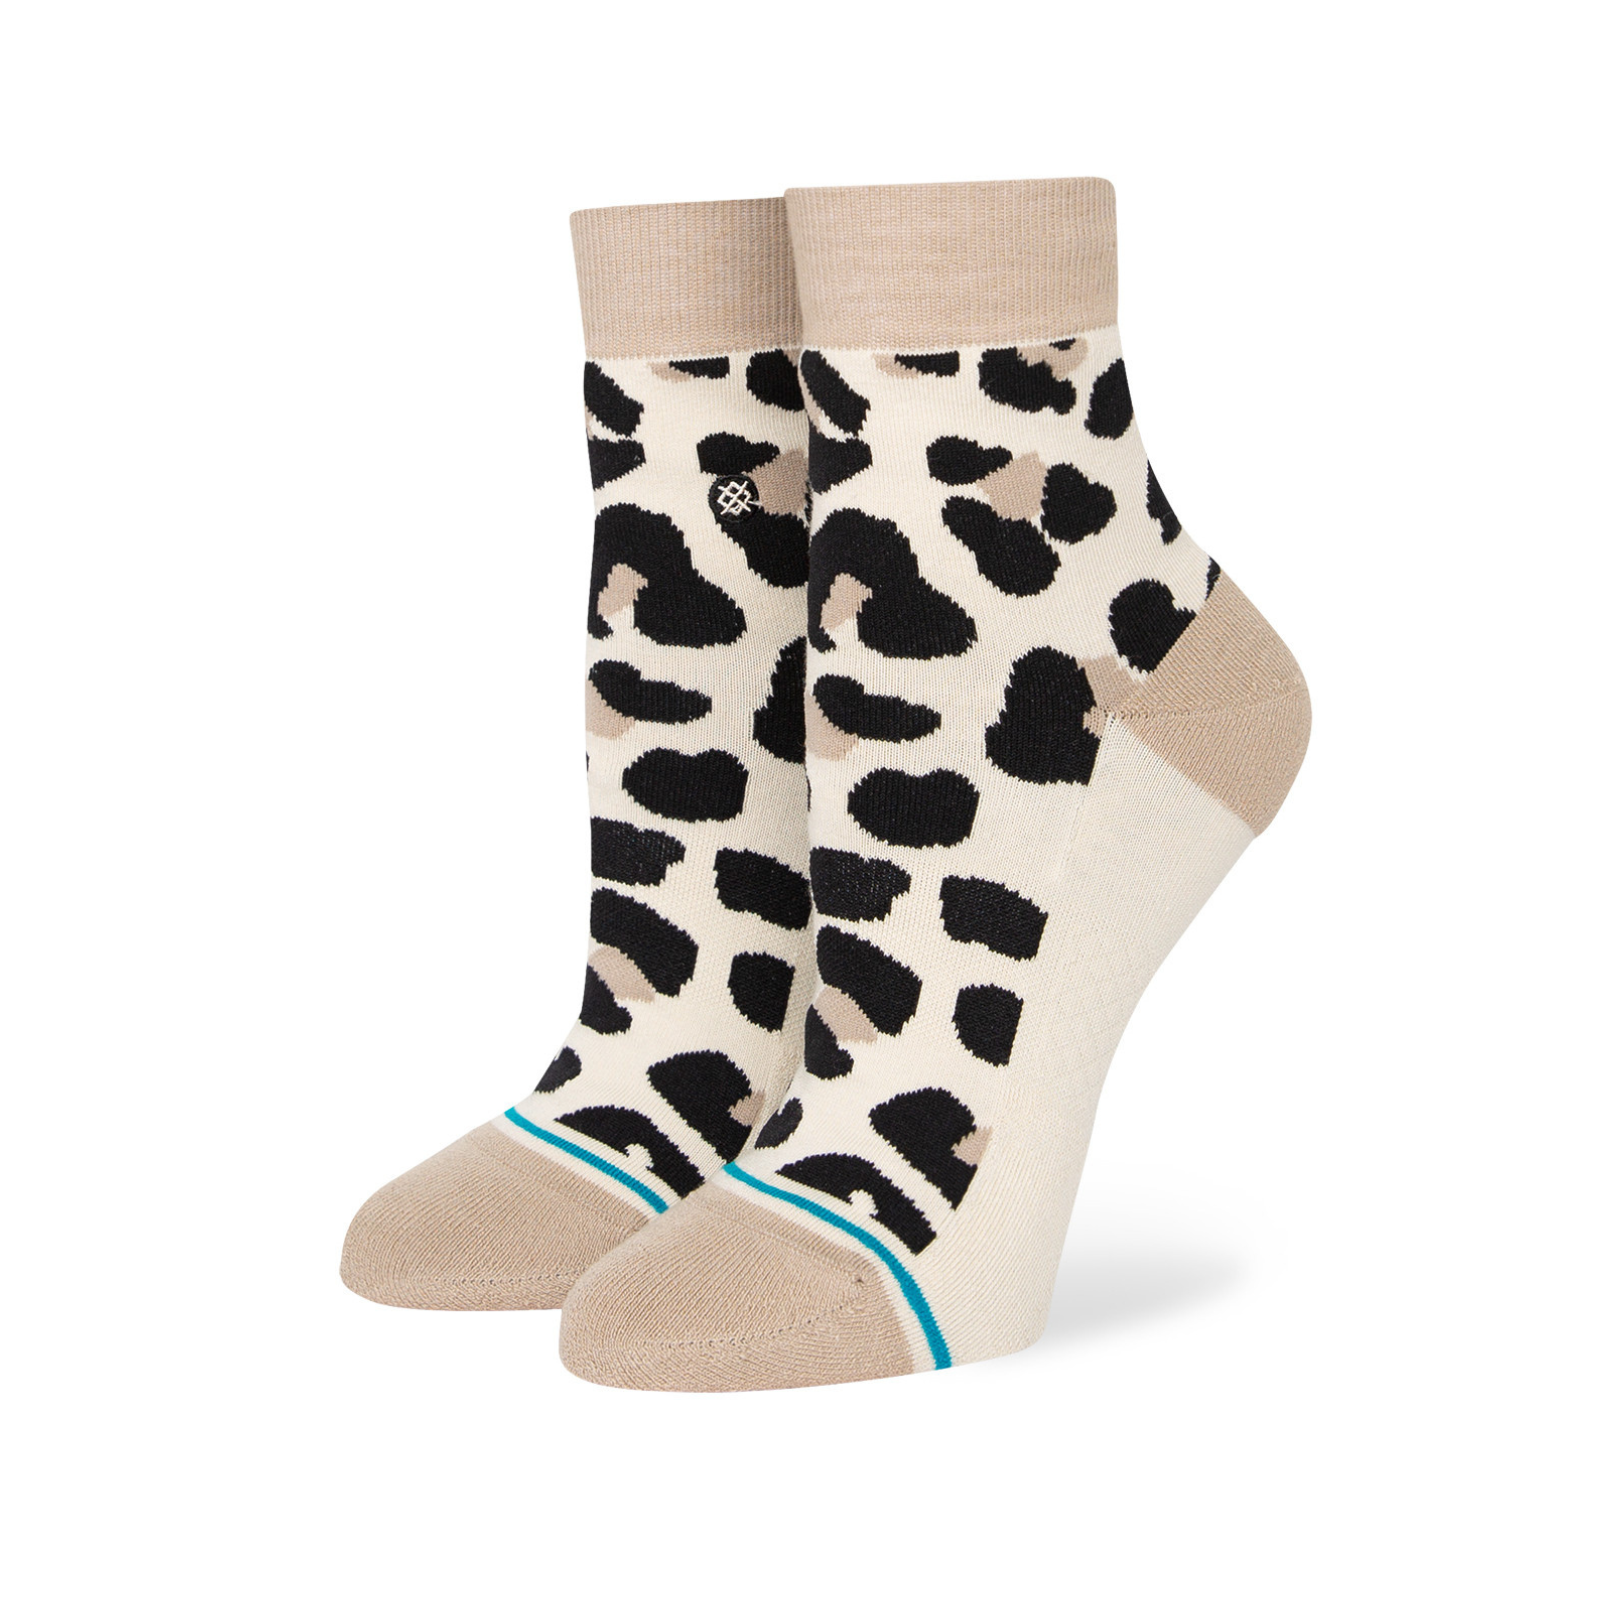 Stance Spot On quarter height women's sock featuring beige sock with leopard print all over worn on display feet